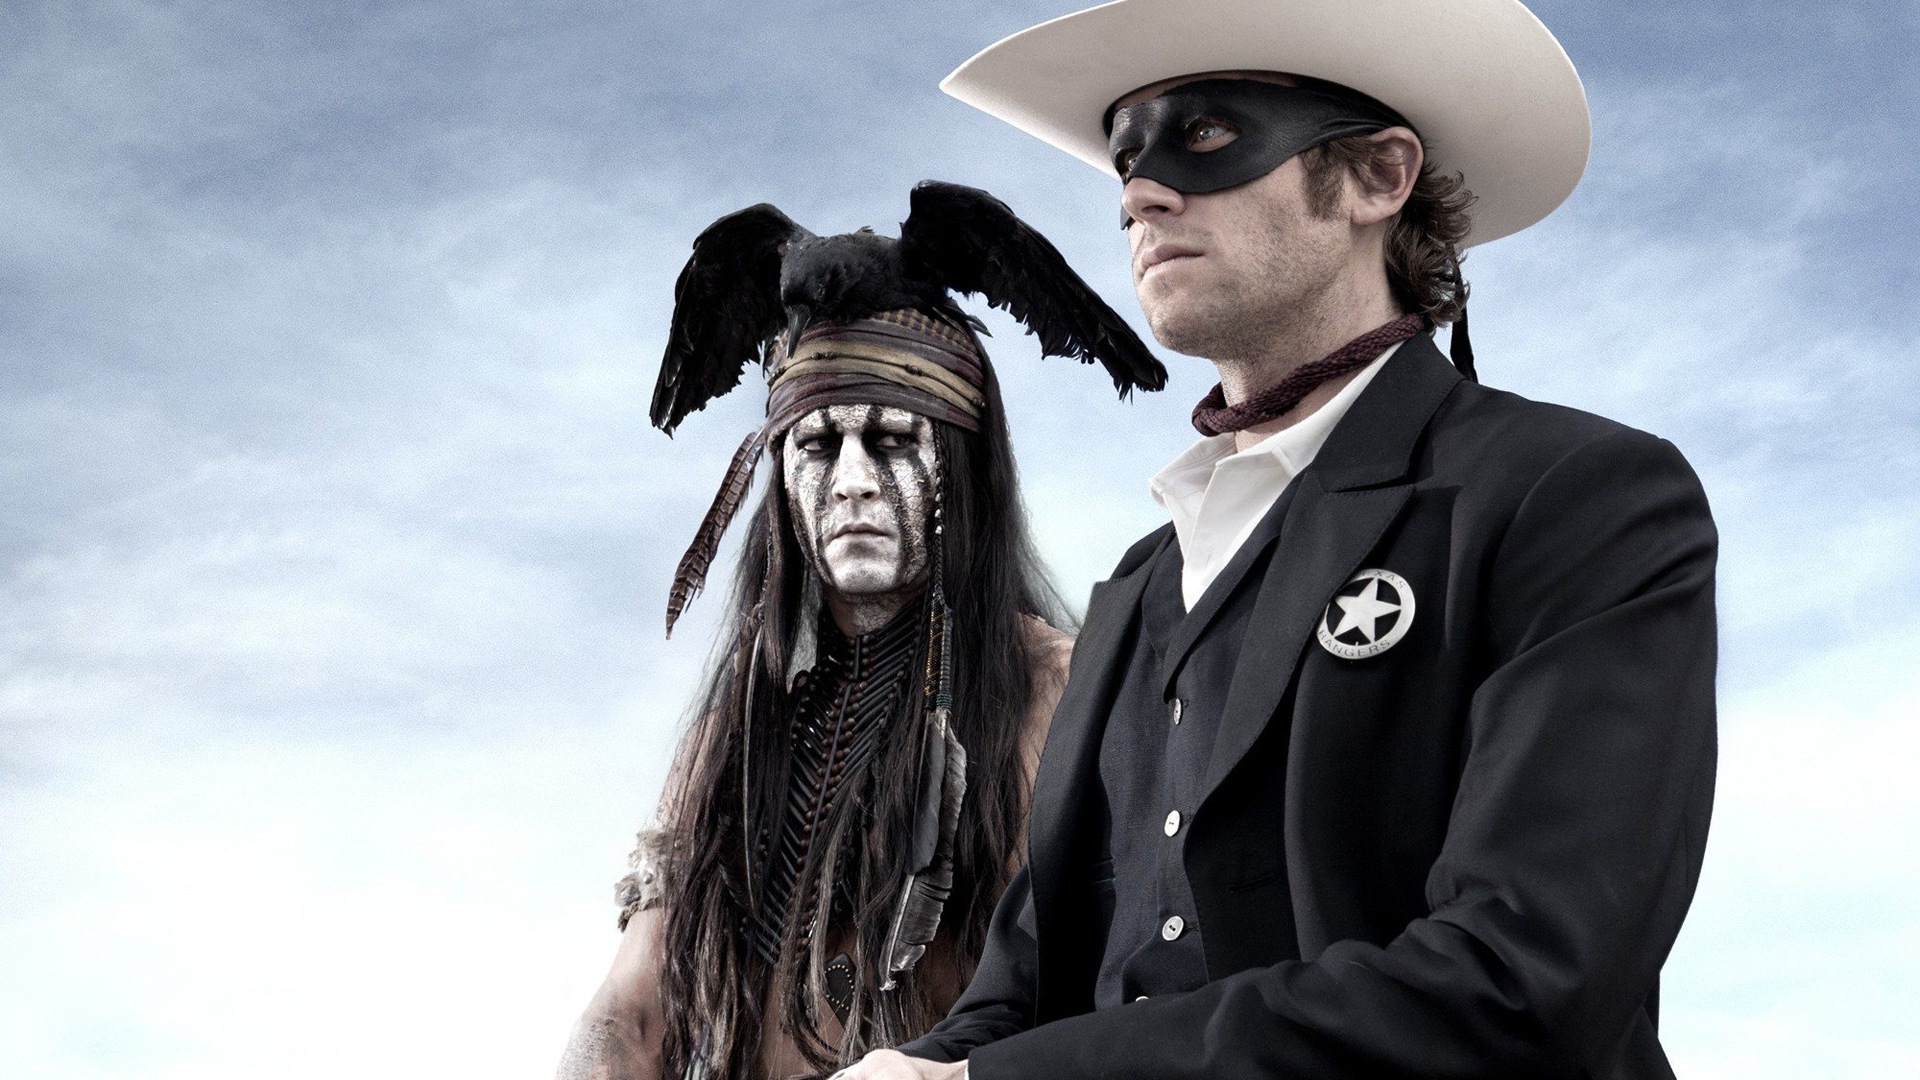 The Lone Ranger HD movie wallpapers #2 - 1920x1080